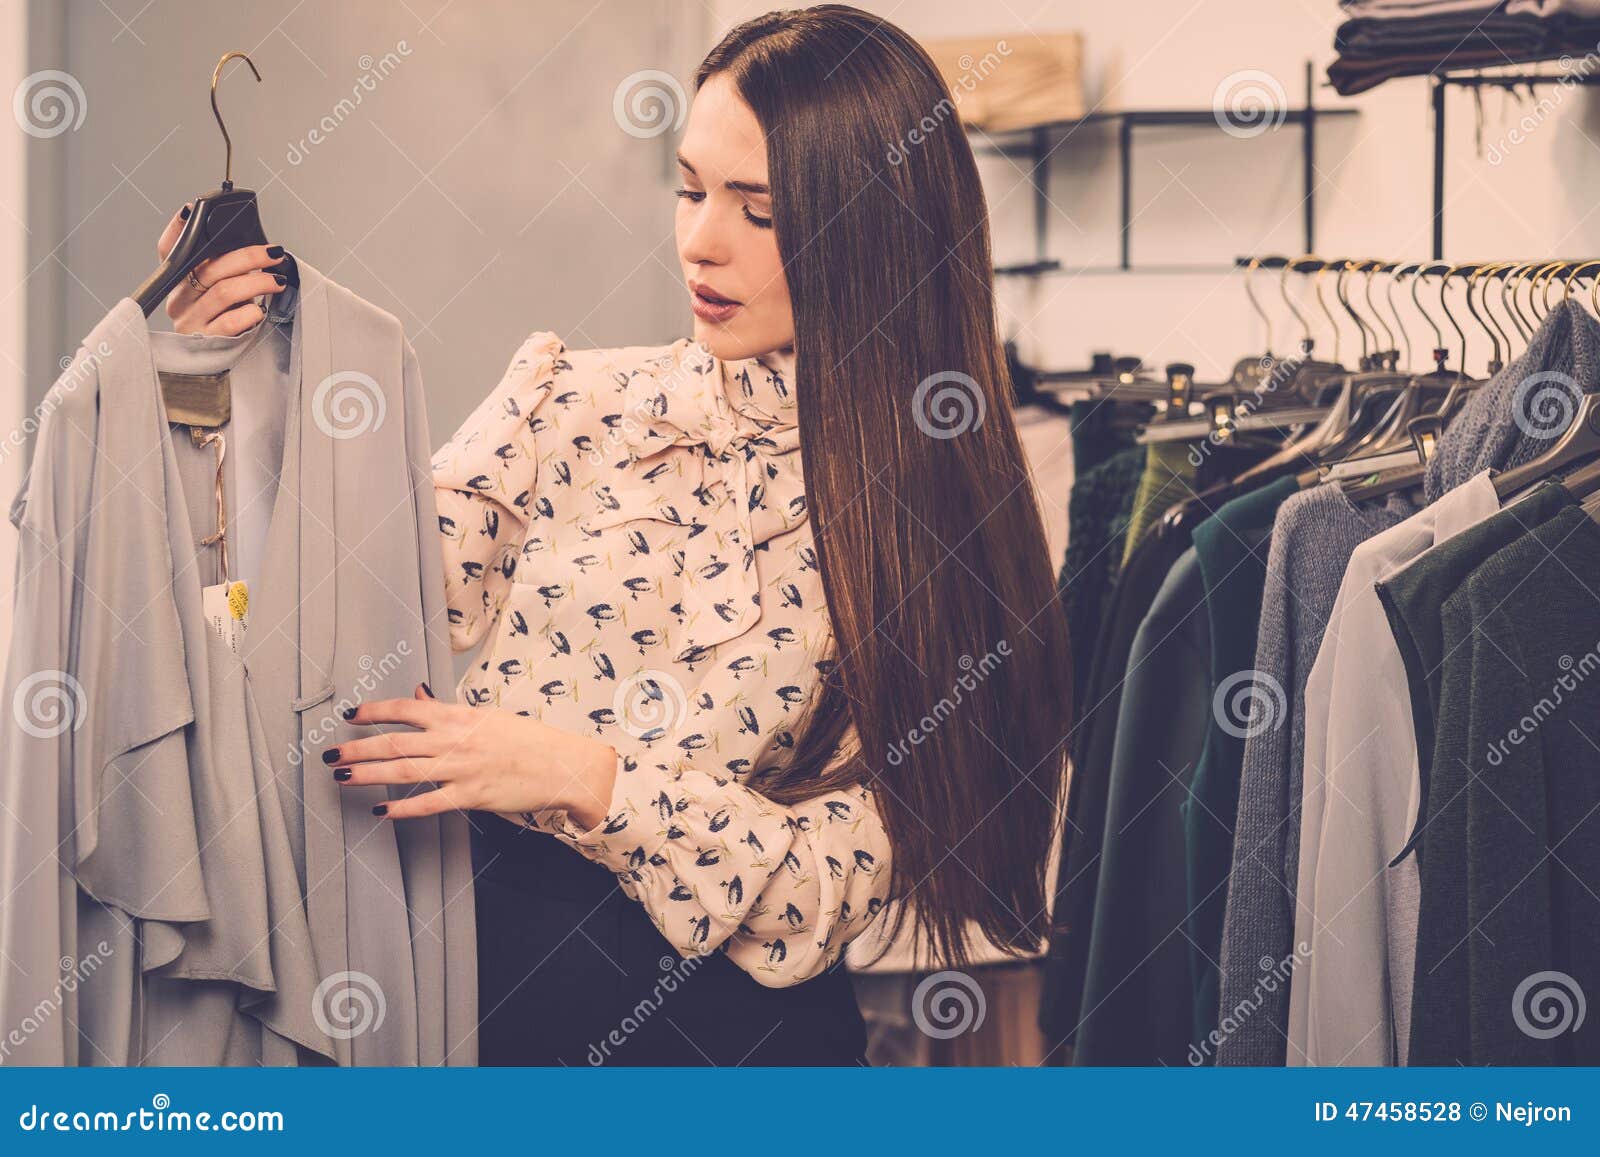 Woman Choosing Clothes a Showroom Stock Photo - Image of changing ...